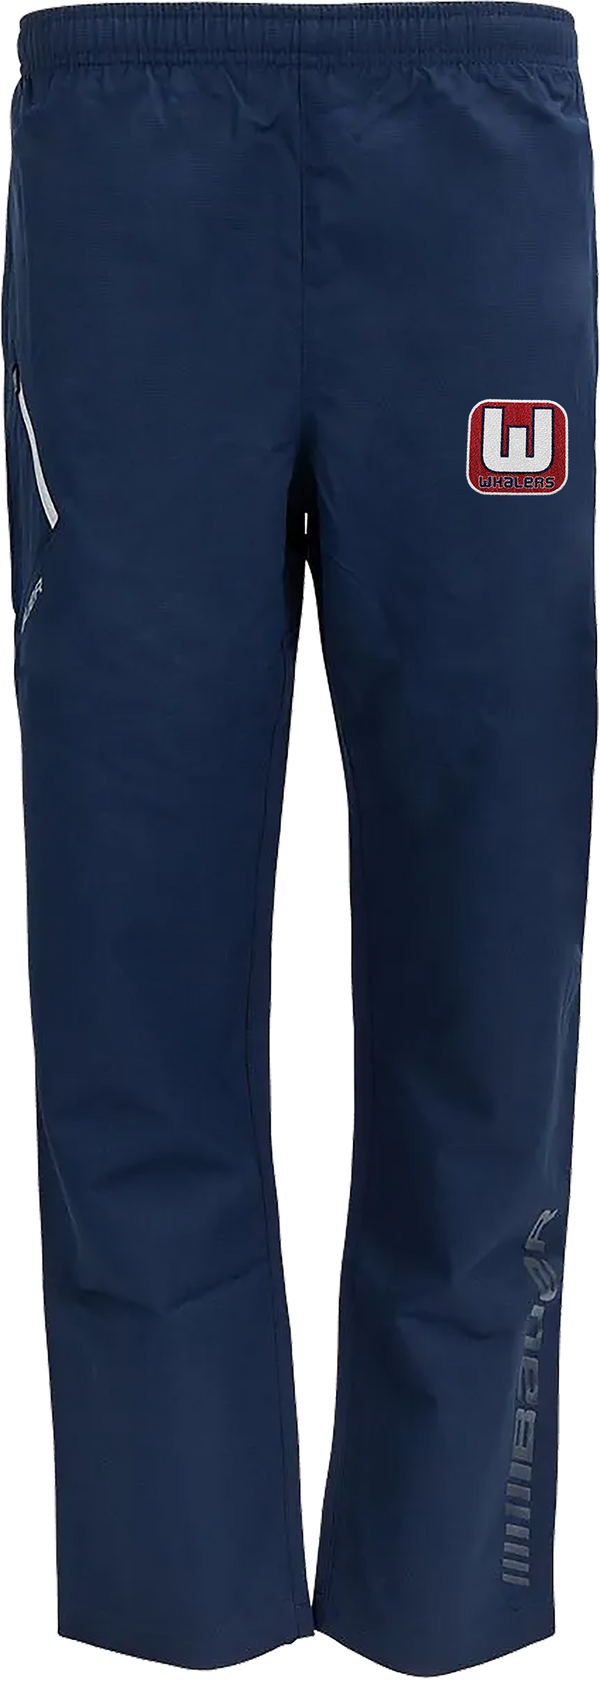 Bauer S24 Adult Lightweight Warm Up Pants - CT Whalers Tier 1